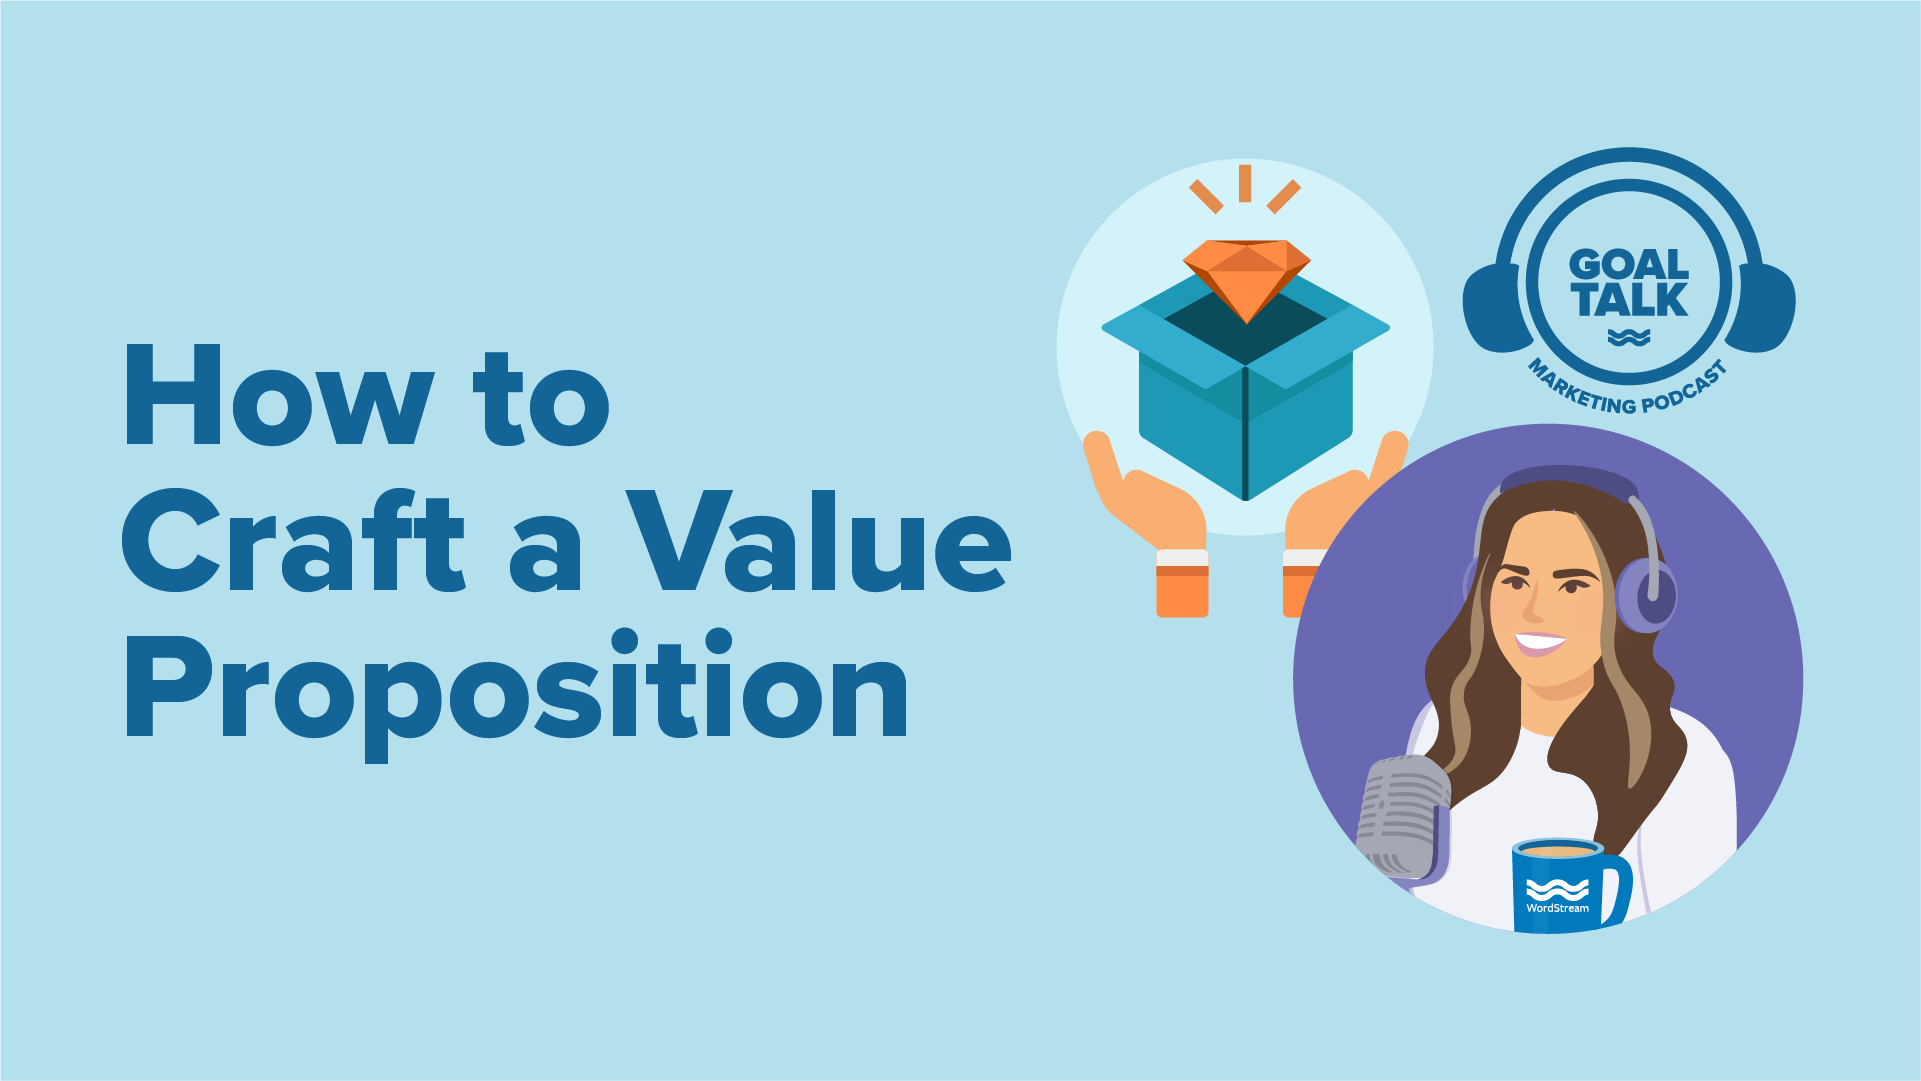 Goal Talk Podcast Episode 3: How to Craft an Irresistible Value Proposition